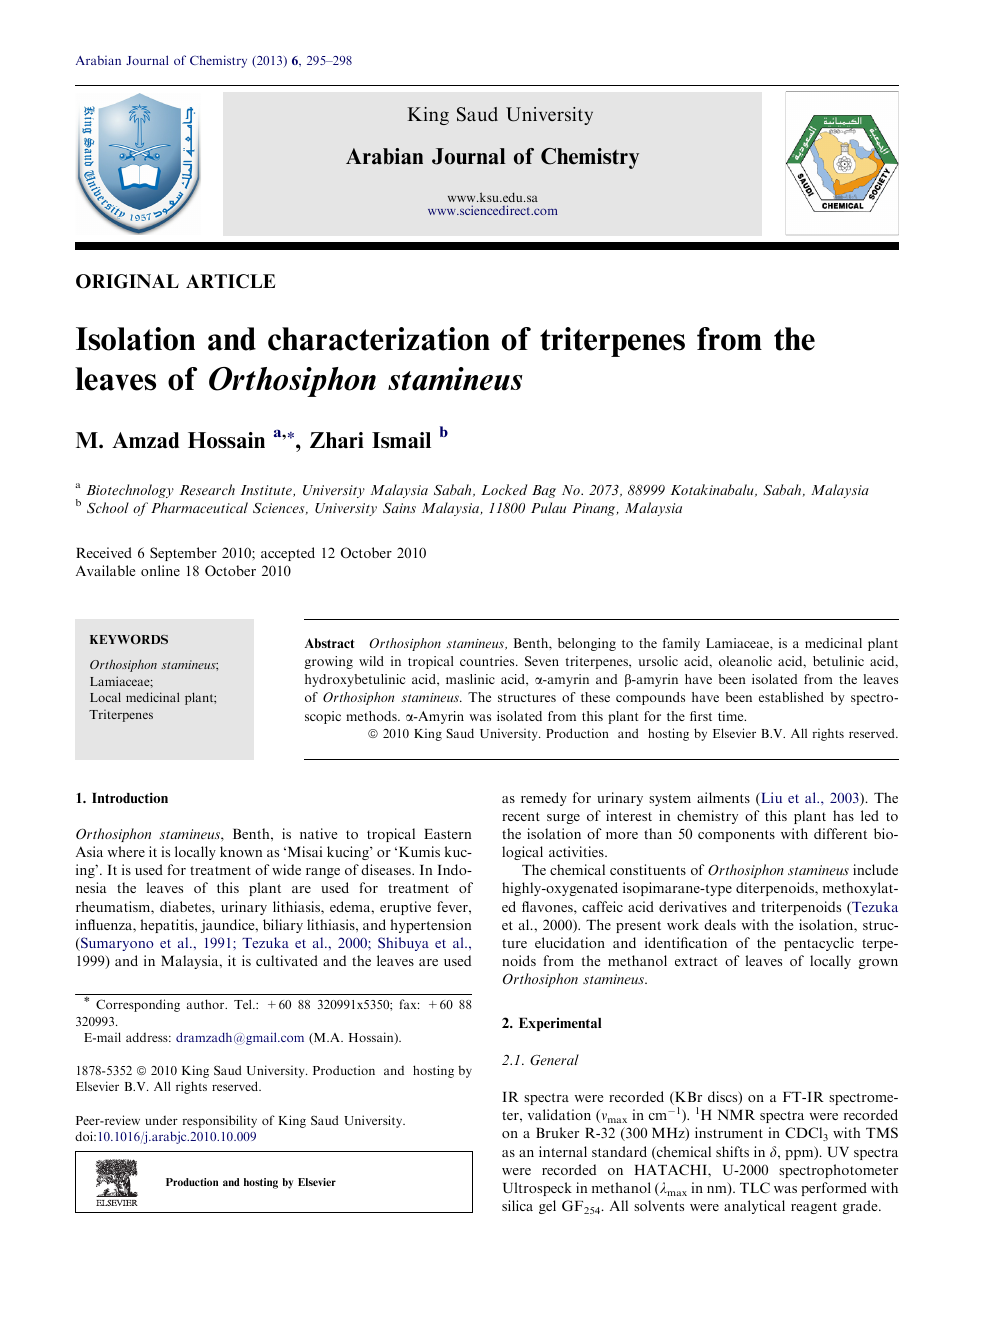 Isolation And Characterization Of Triterpenes From The Leaves Of Orthosiphon Stamineus Topic Of Research Paper In Chemical Sciences Download Scholarly Article Pdf And Read For Free On Cyberleninka Open Science Hub